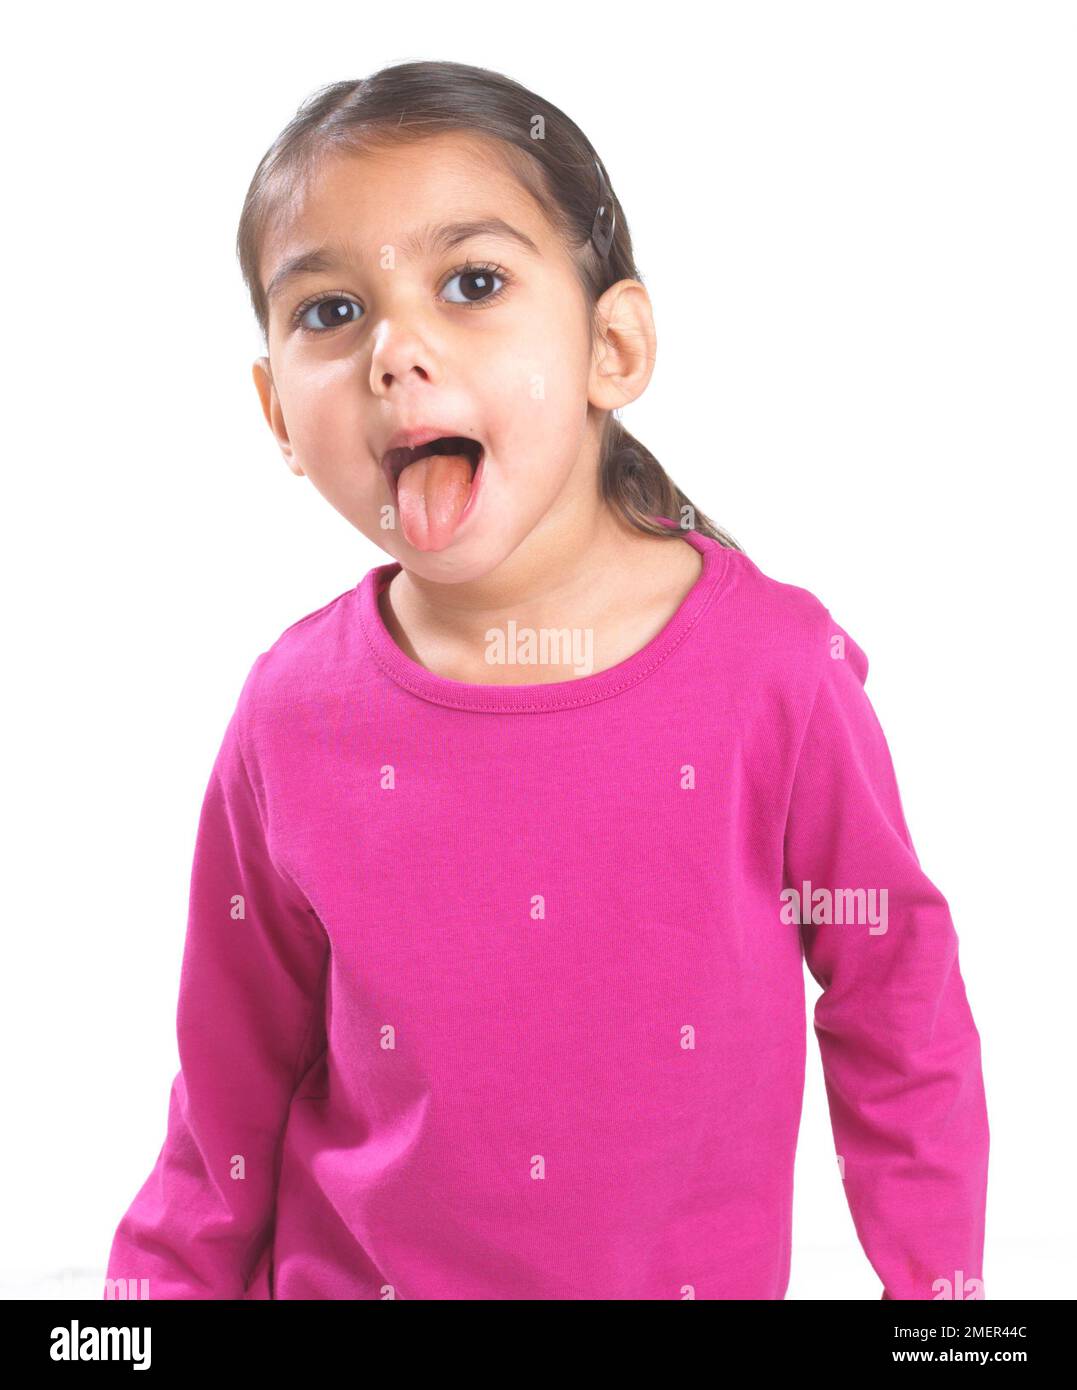 Girl in pink shirt sticking her tongue out, 3.5 years Stock Photo